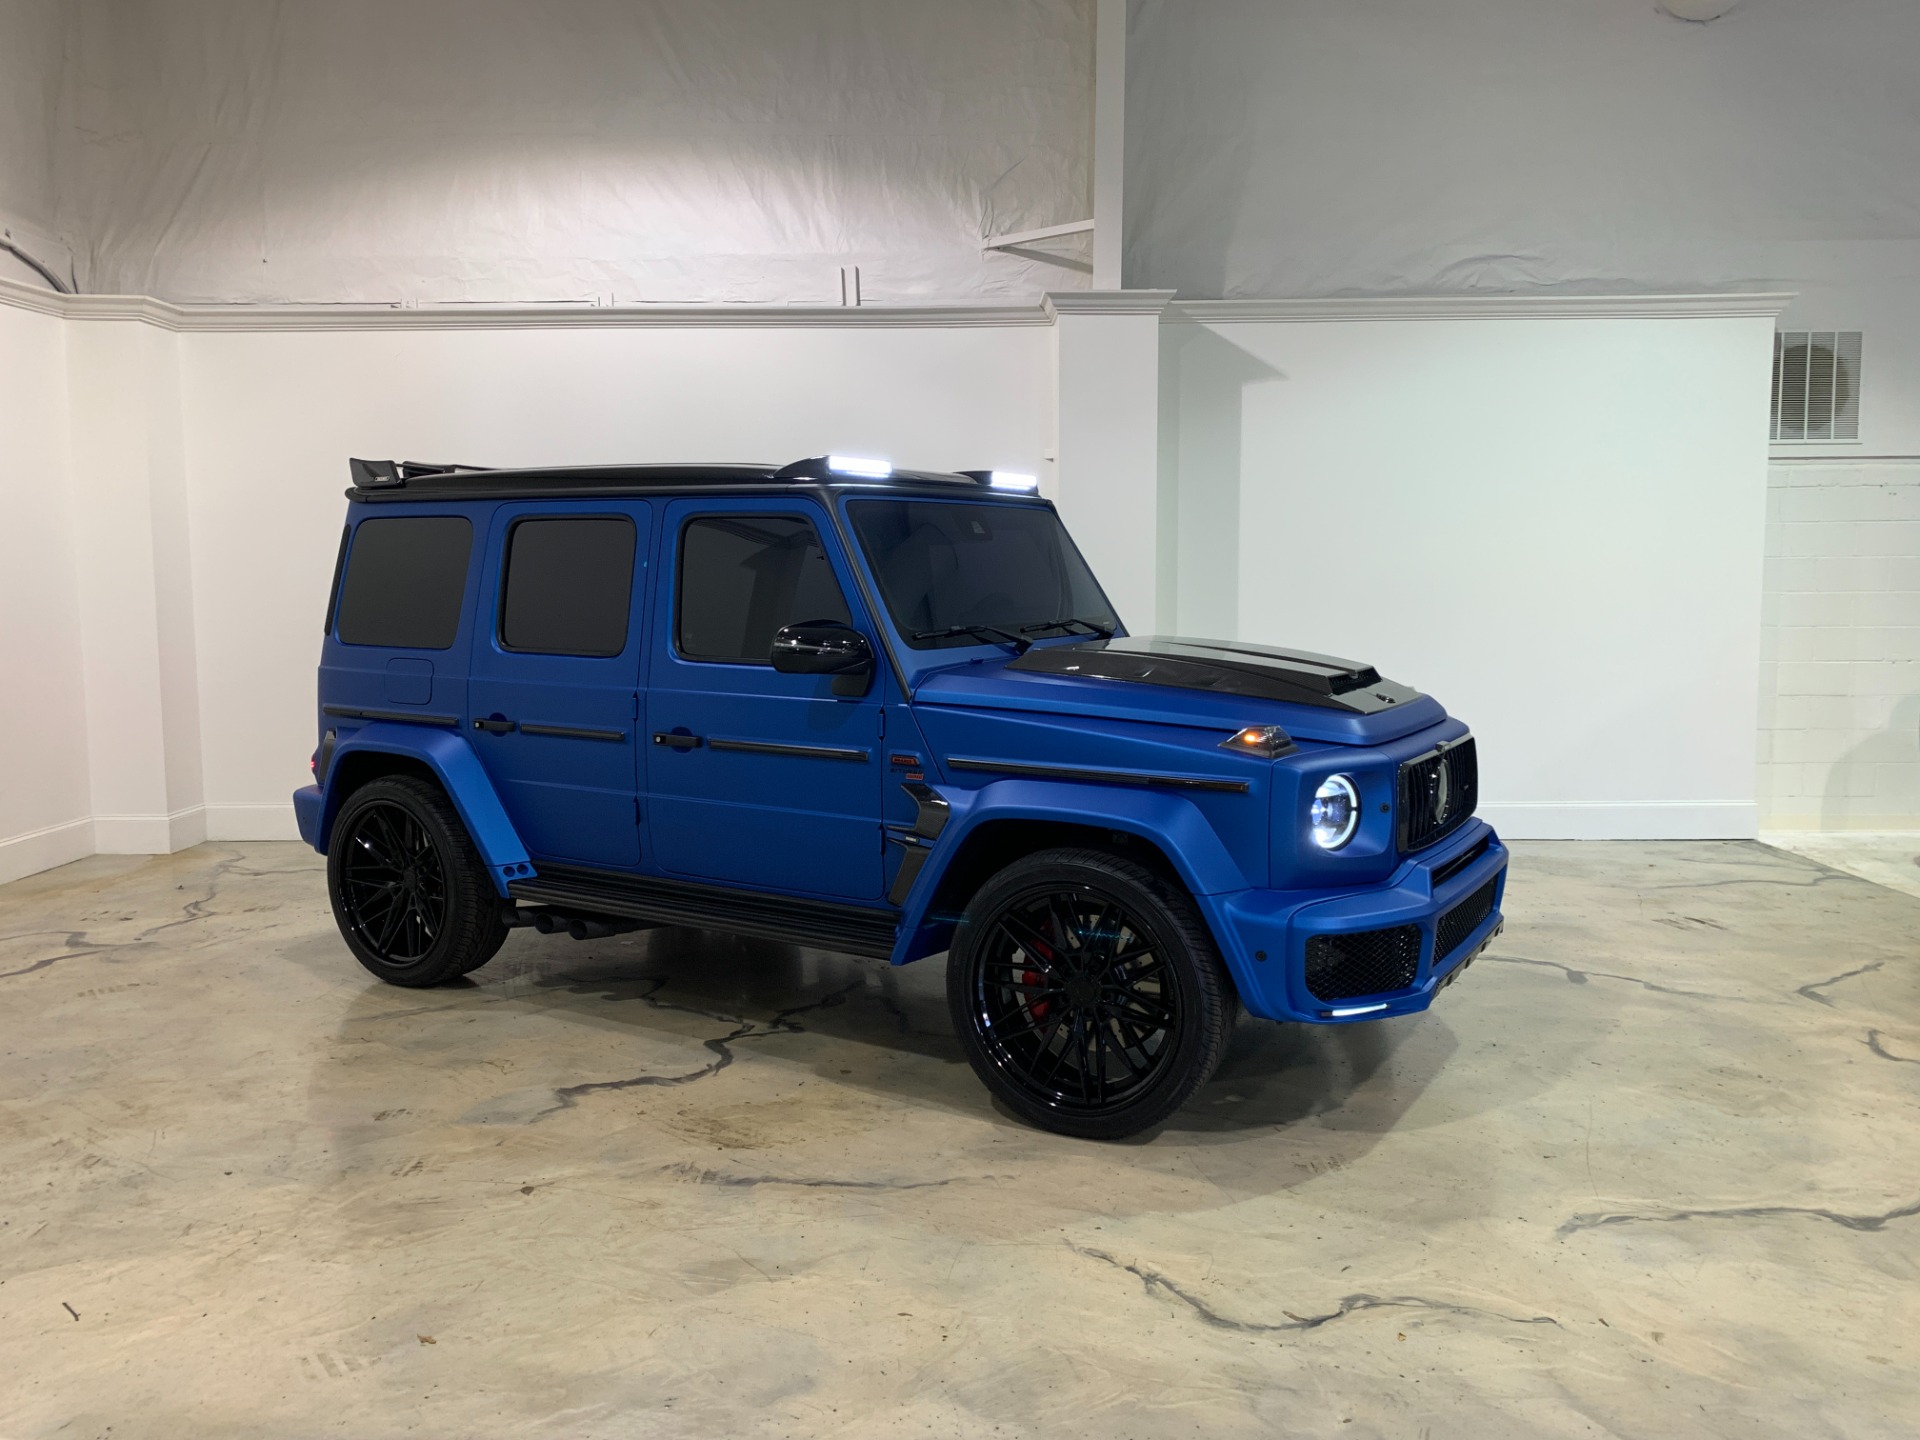 Used Mercedes Benz G63 Brabus 800 For Sale Sold Road Show International Llc Stock 3458